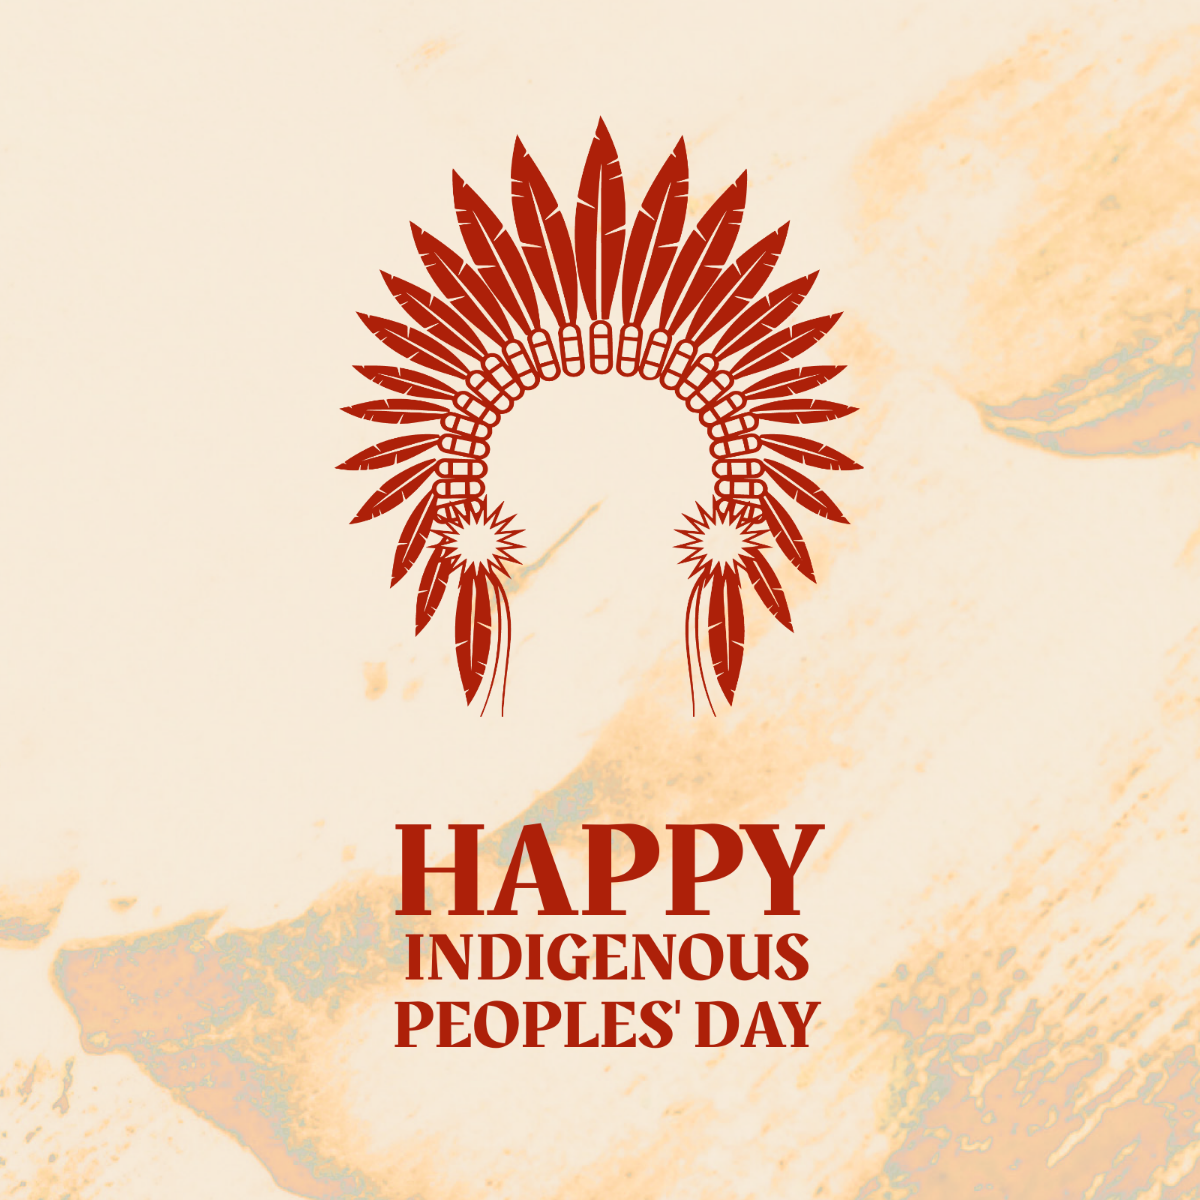 Free Indigenous Peoples' Day WhatsApp Post Template